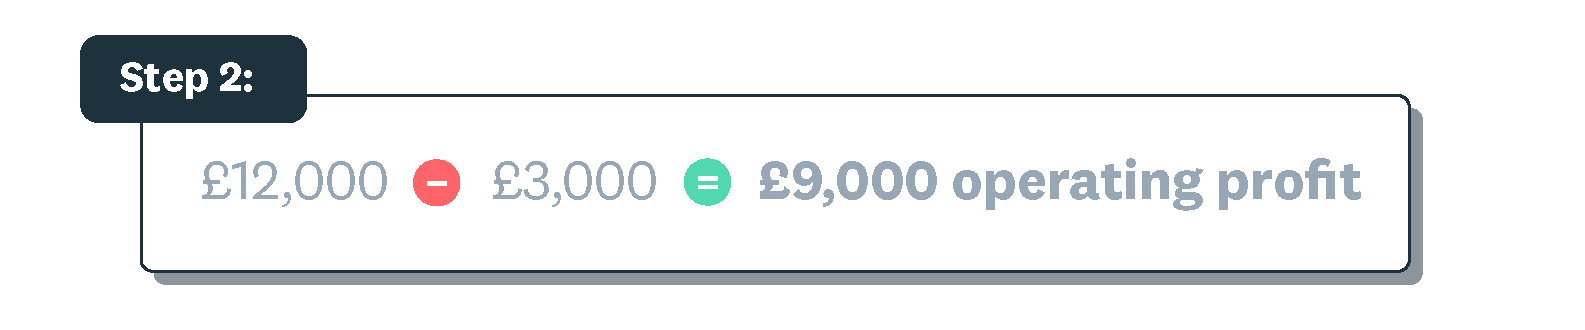 Step 2 example shows £12,000 minus £3,000 equals £9,000 operating profit.